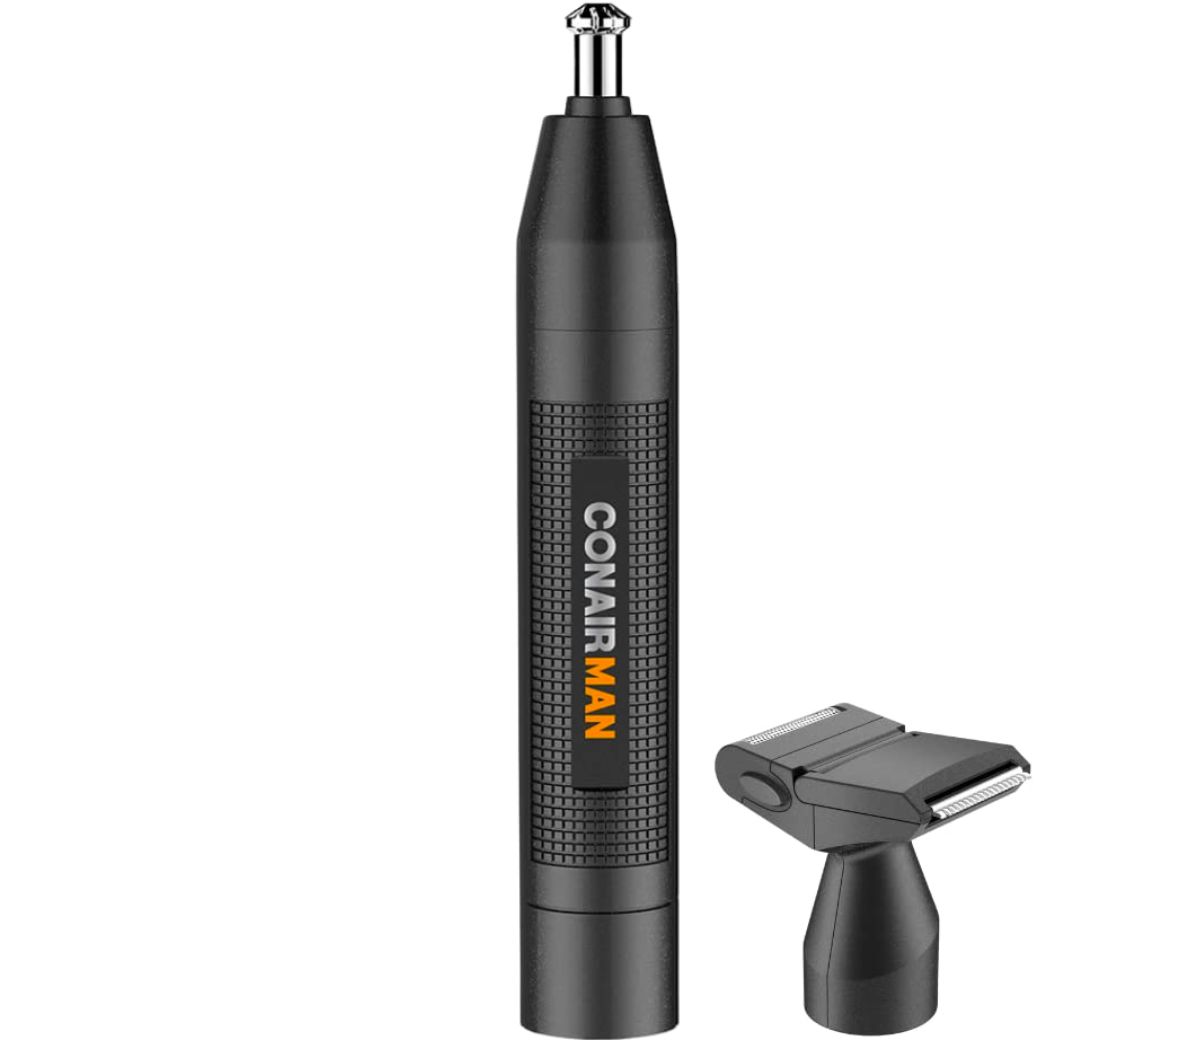 Conair mens nose hair trimmer in black with attachemtn